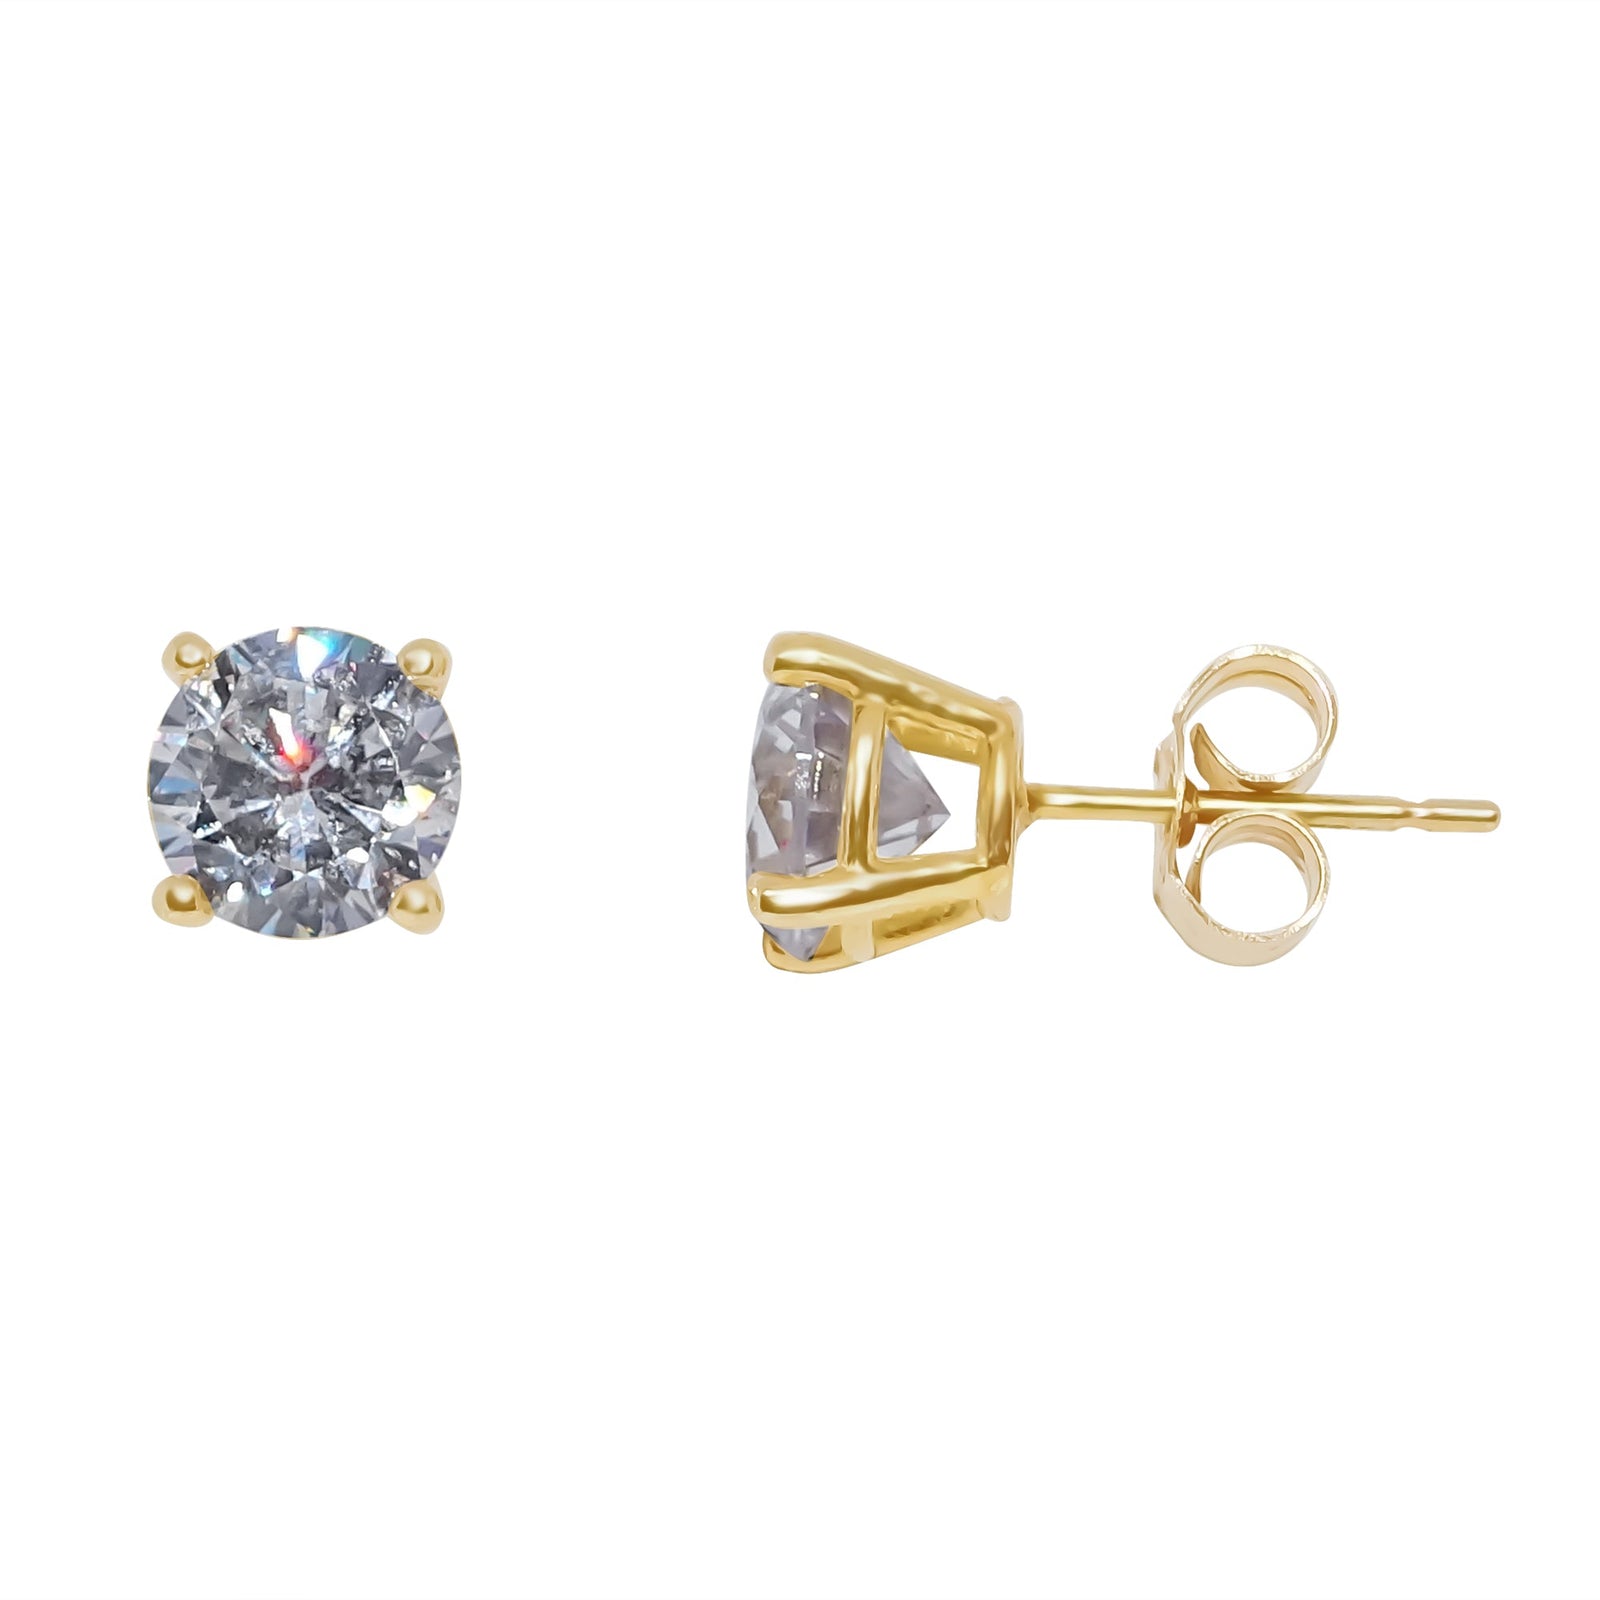 9ct gold 6mm round cz stud earrings